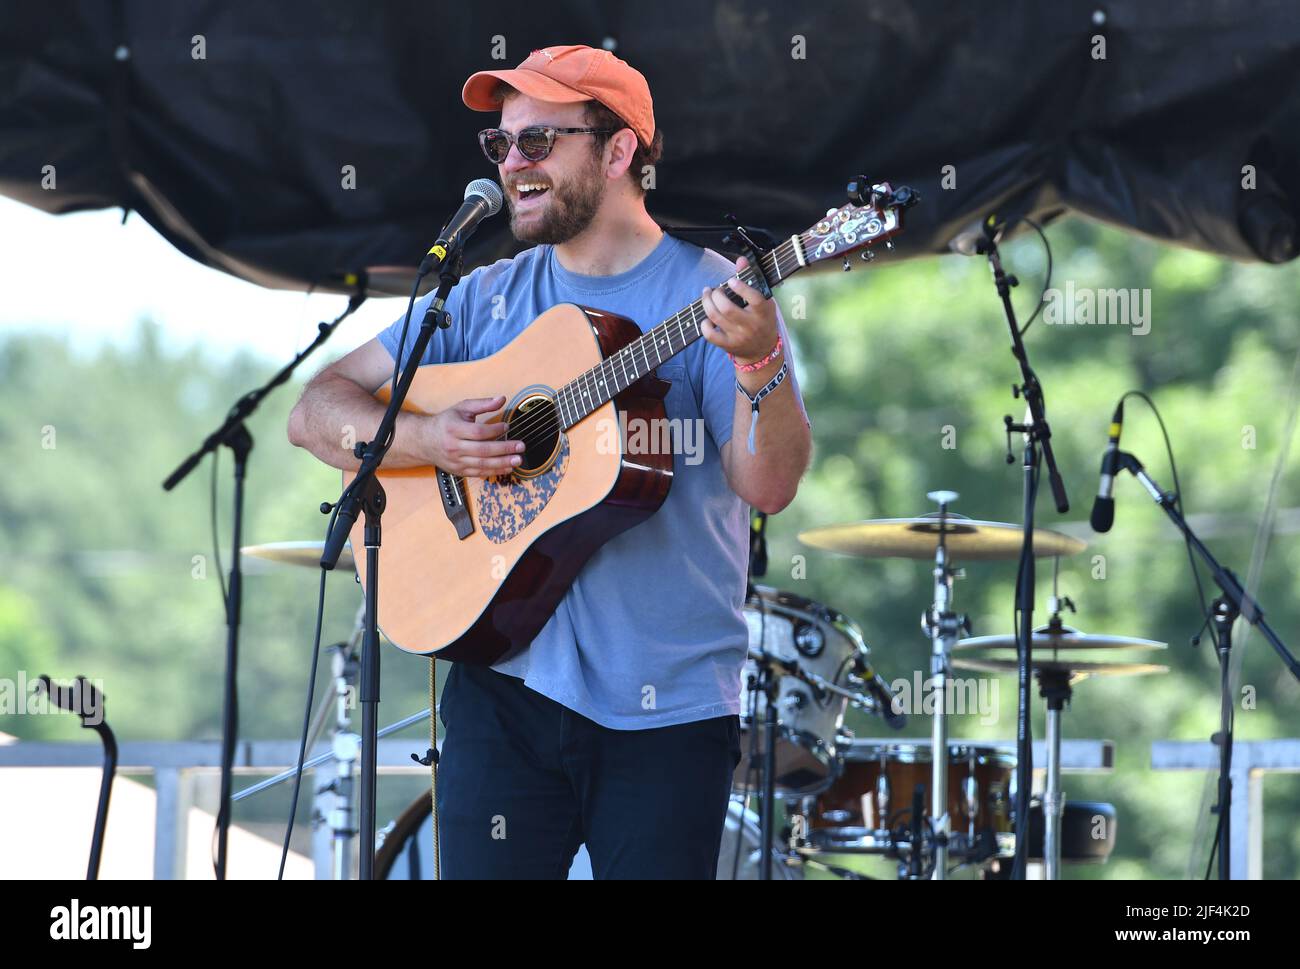 Musician Matthew Fowler is shown performing on stage during a “live” concert appearance at the Green River Festival. Stock Photo